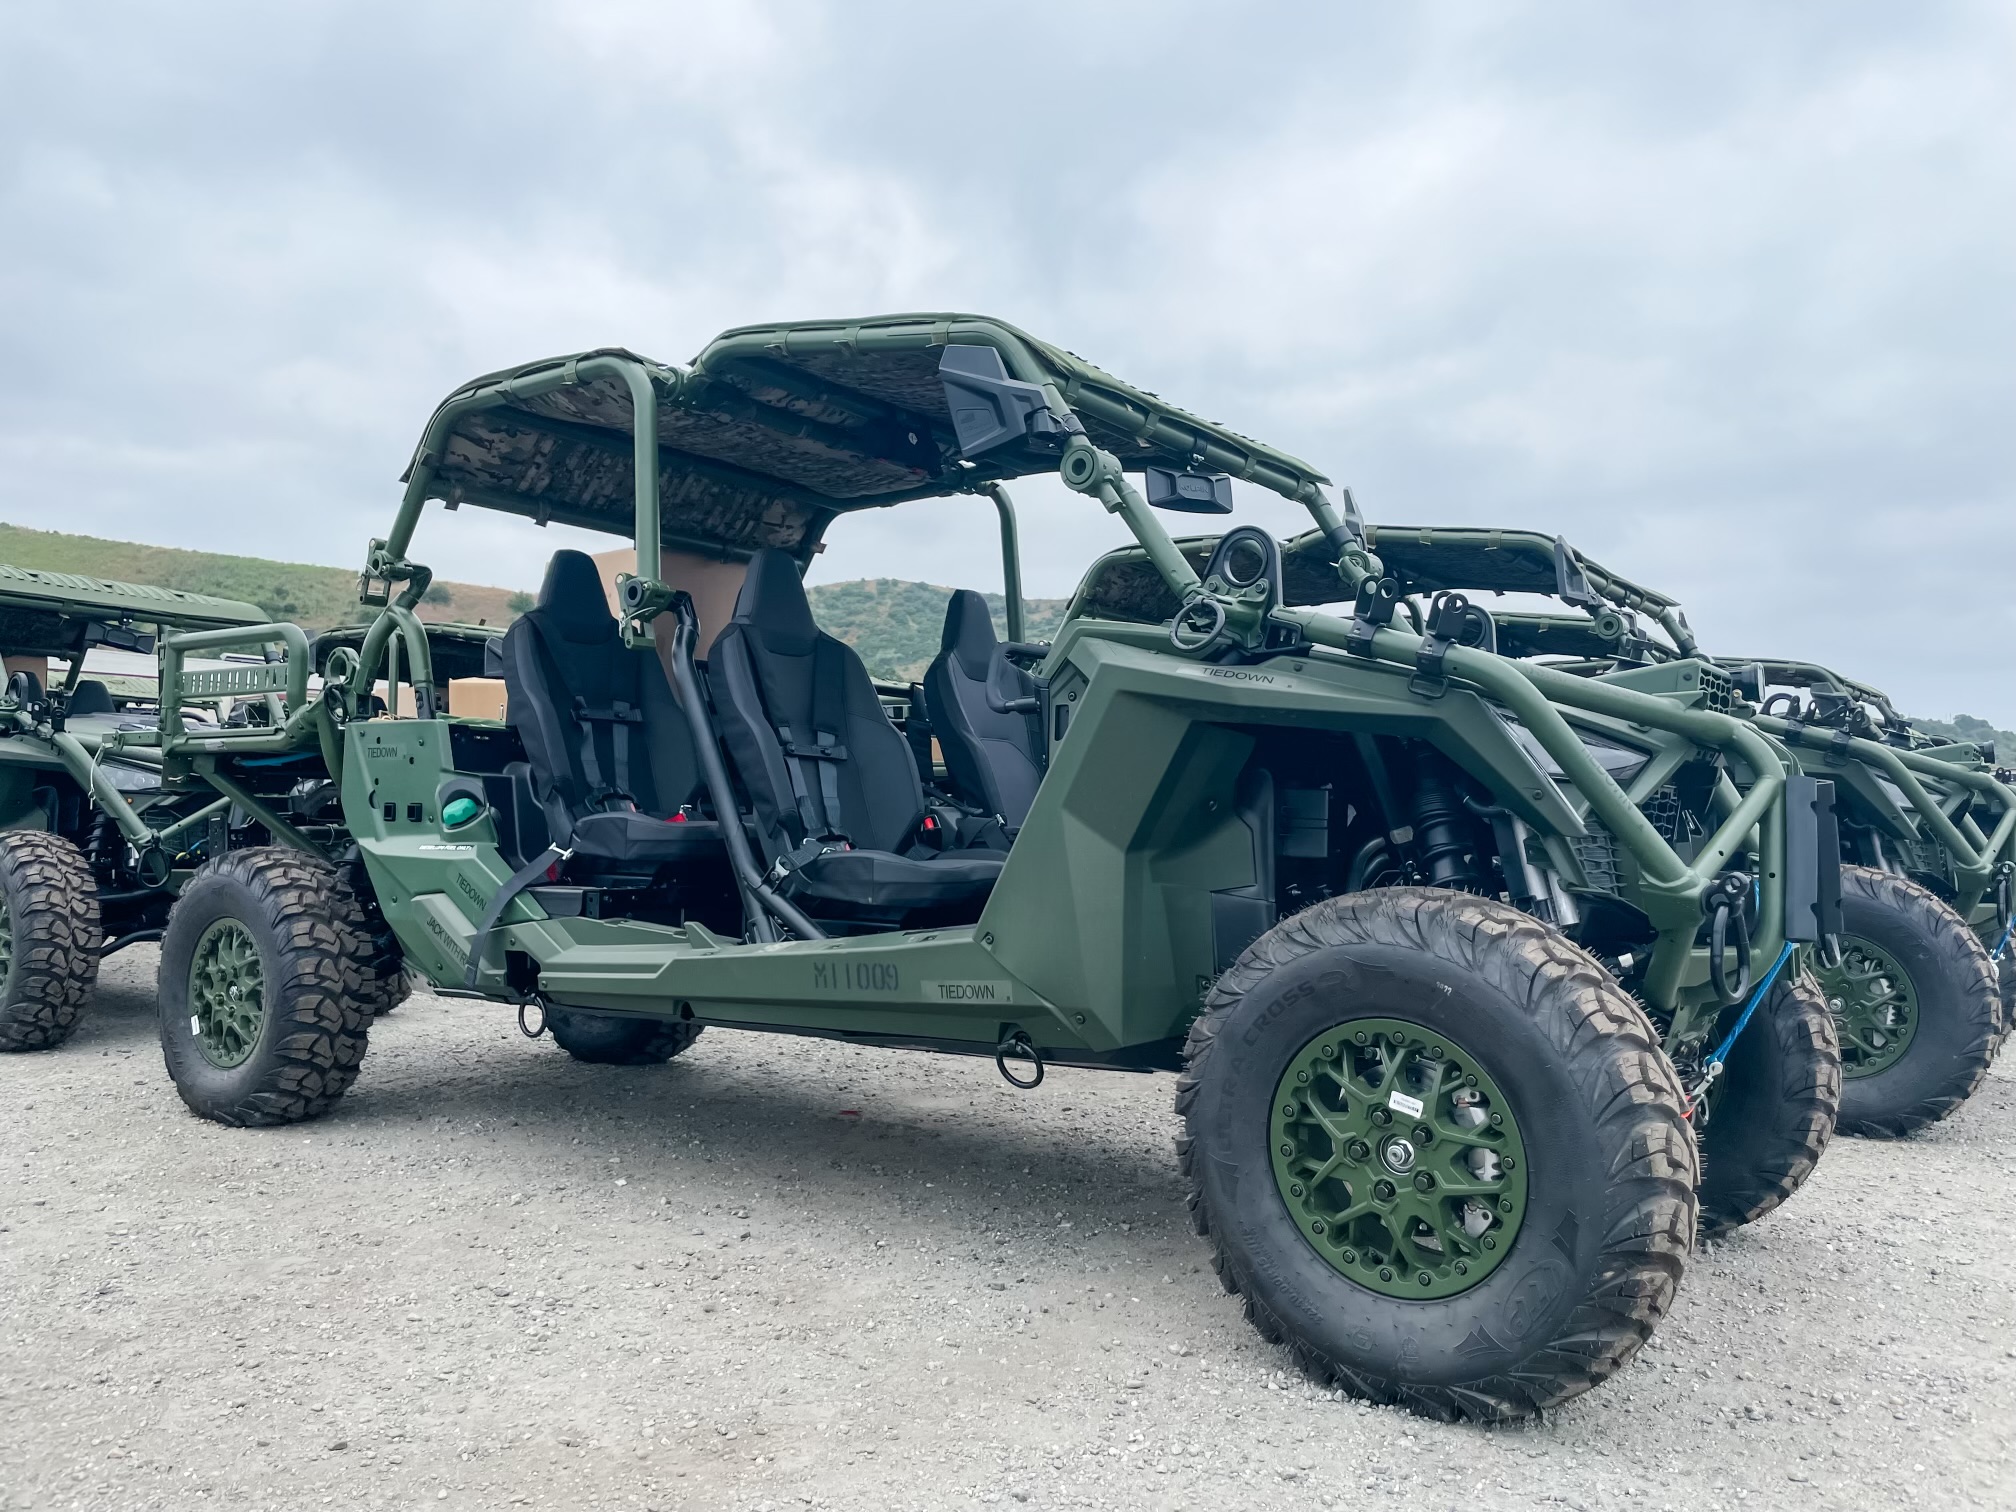 Quantico Base, Va - The ULTV is a modular, off-road, utility vehicle which can be configured to provide logistical support to the FMF, perform casualty evacuation, command and control, and electronic warfare missions. (Marine Corps photo by Ashley Calingo.)